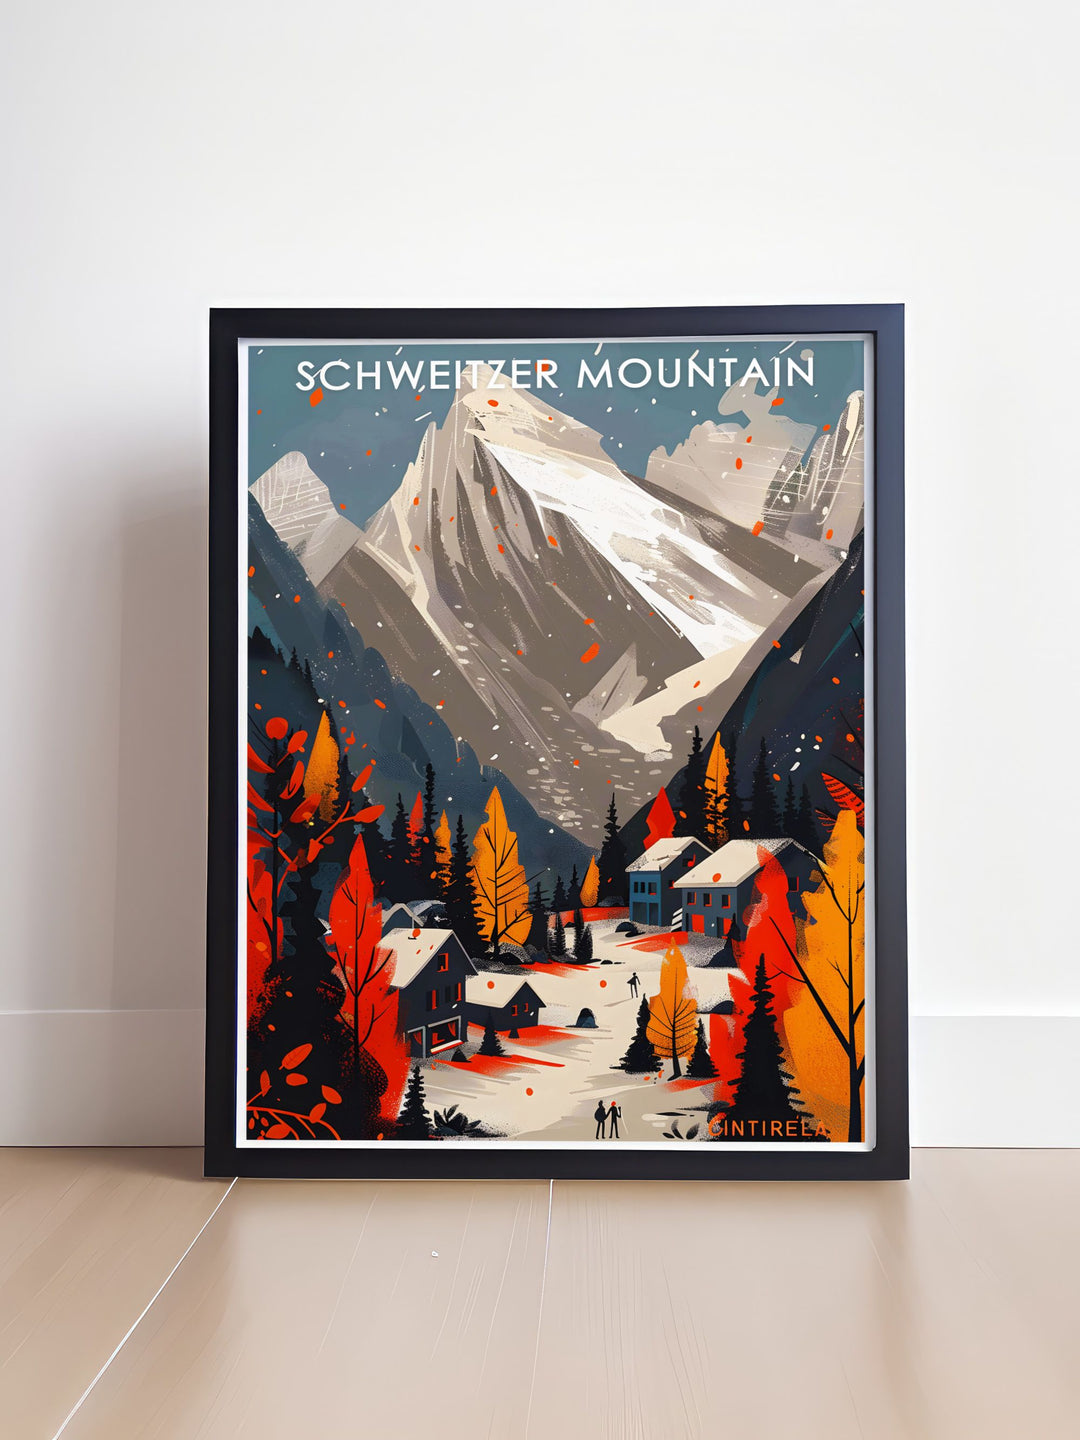 Capture the unique character of Schweitzer Village with this vibrant print. Its picturesque setting and welcoming atmosphere make it an ideal addition to your gallery wall art collection.